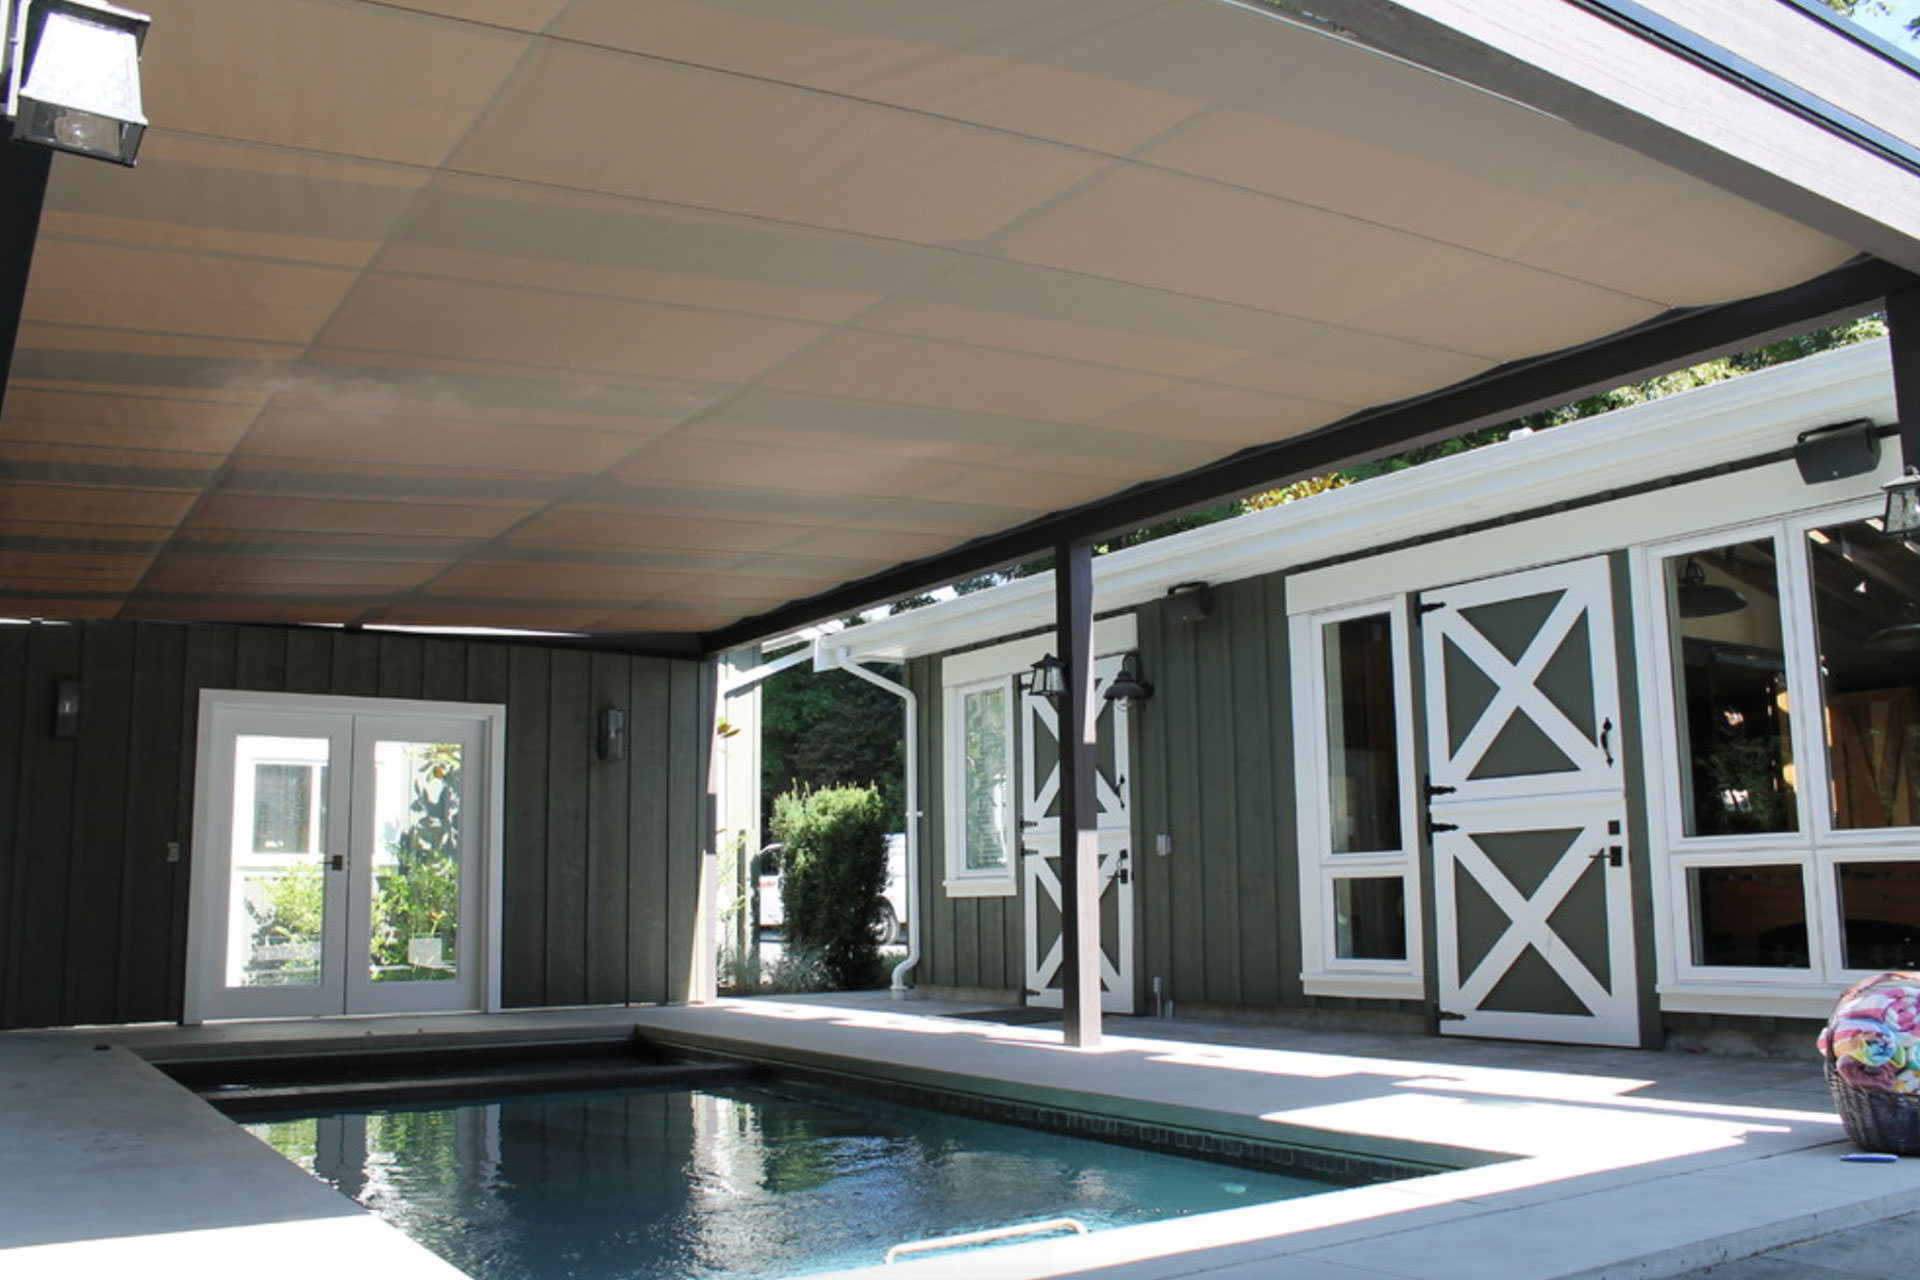 Above Ground Pool Shade
 Pool Shade Ideas 8 Ways to Cover Your Swimming Pool